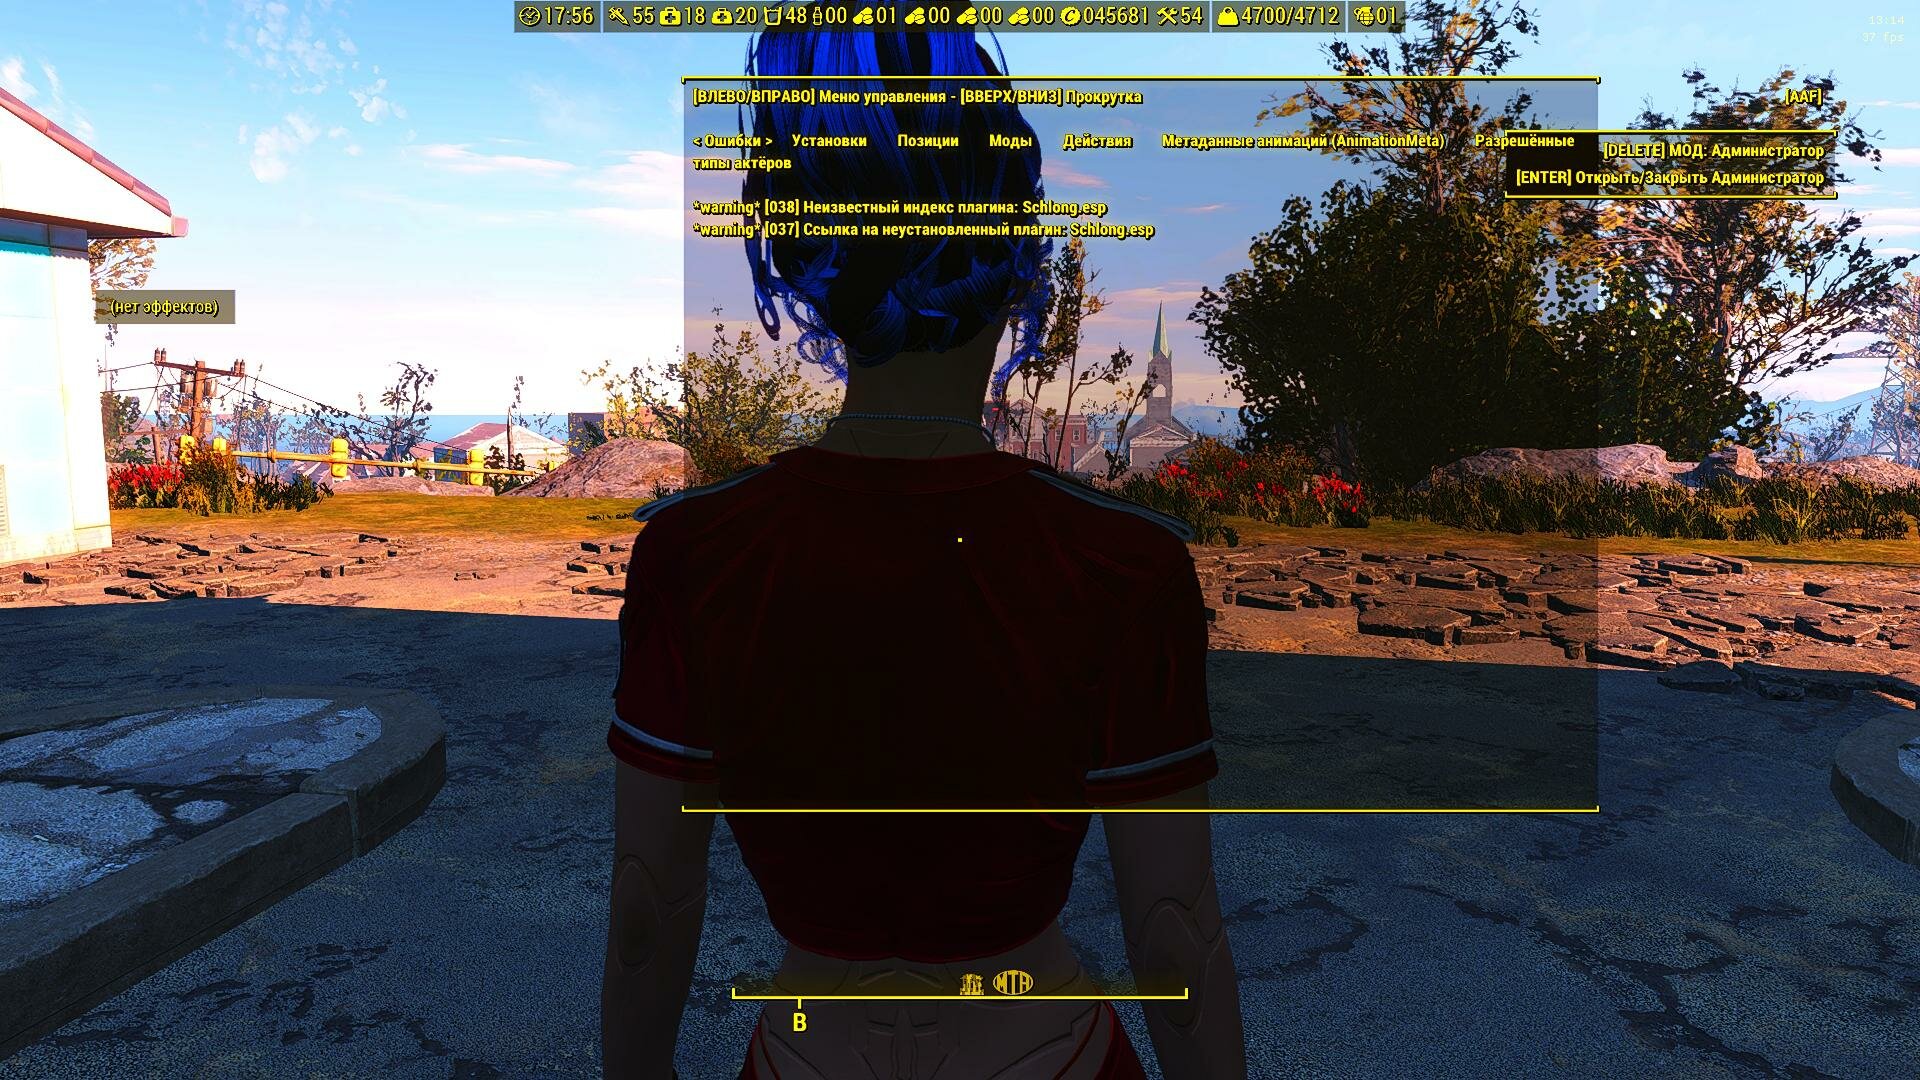 [FO4] [AAF] Themes - VanillaSexAnimations, Kinky/Aggressive and